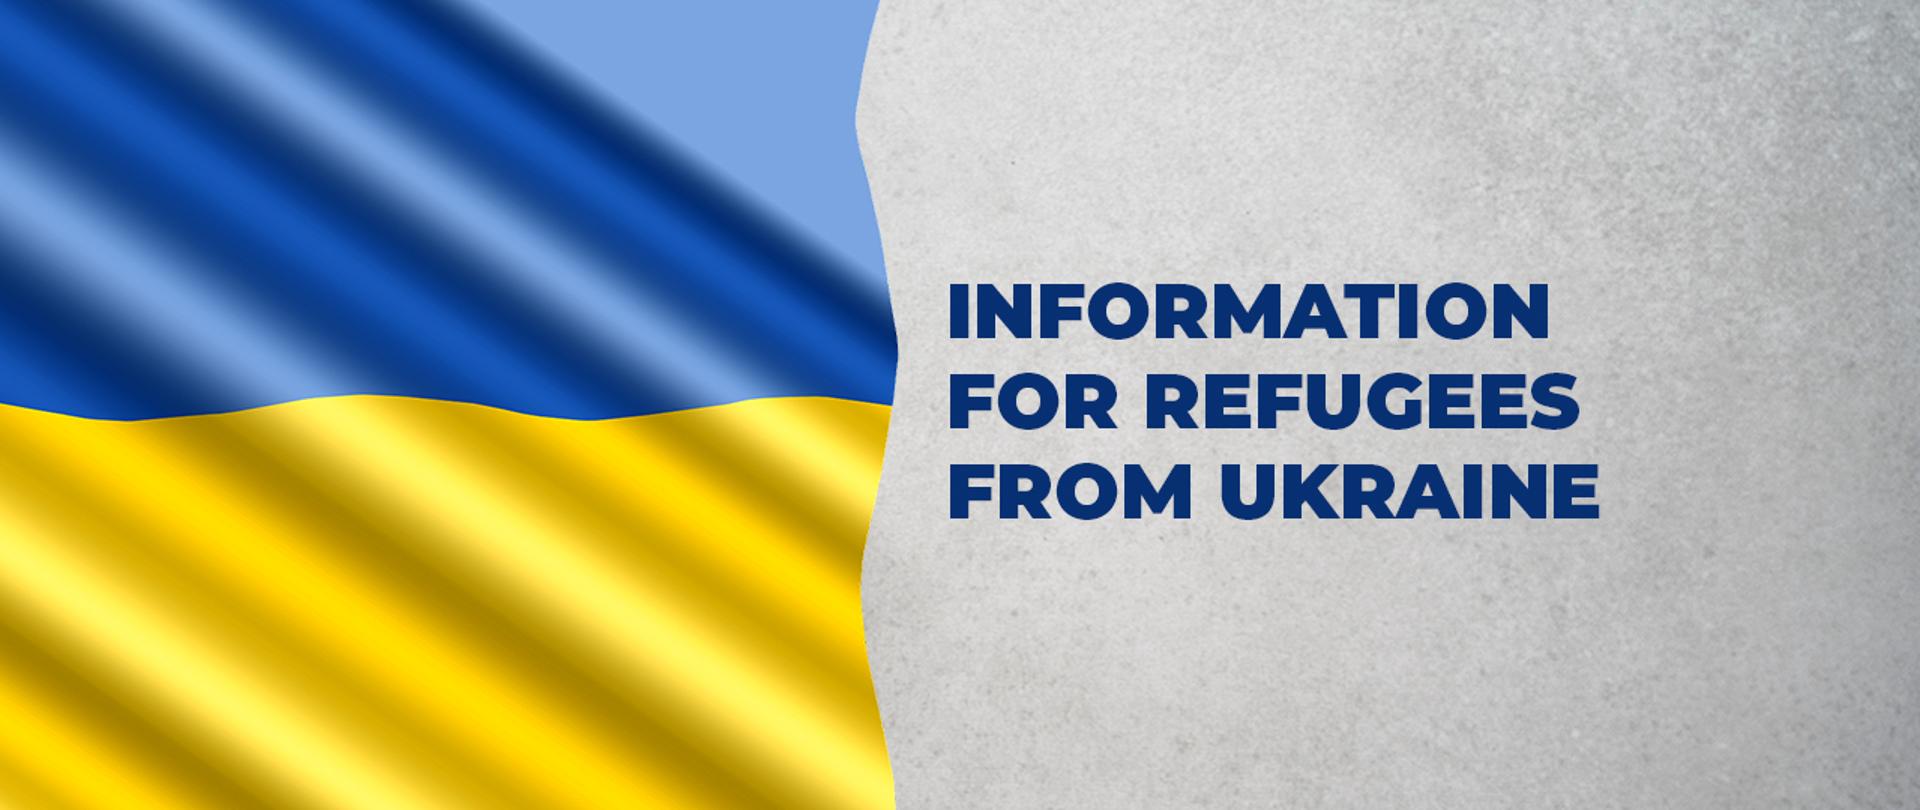 The graphic shows the flag of Ukraine on the left side, on the right side the text: Information for refugees from Ukraine.